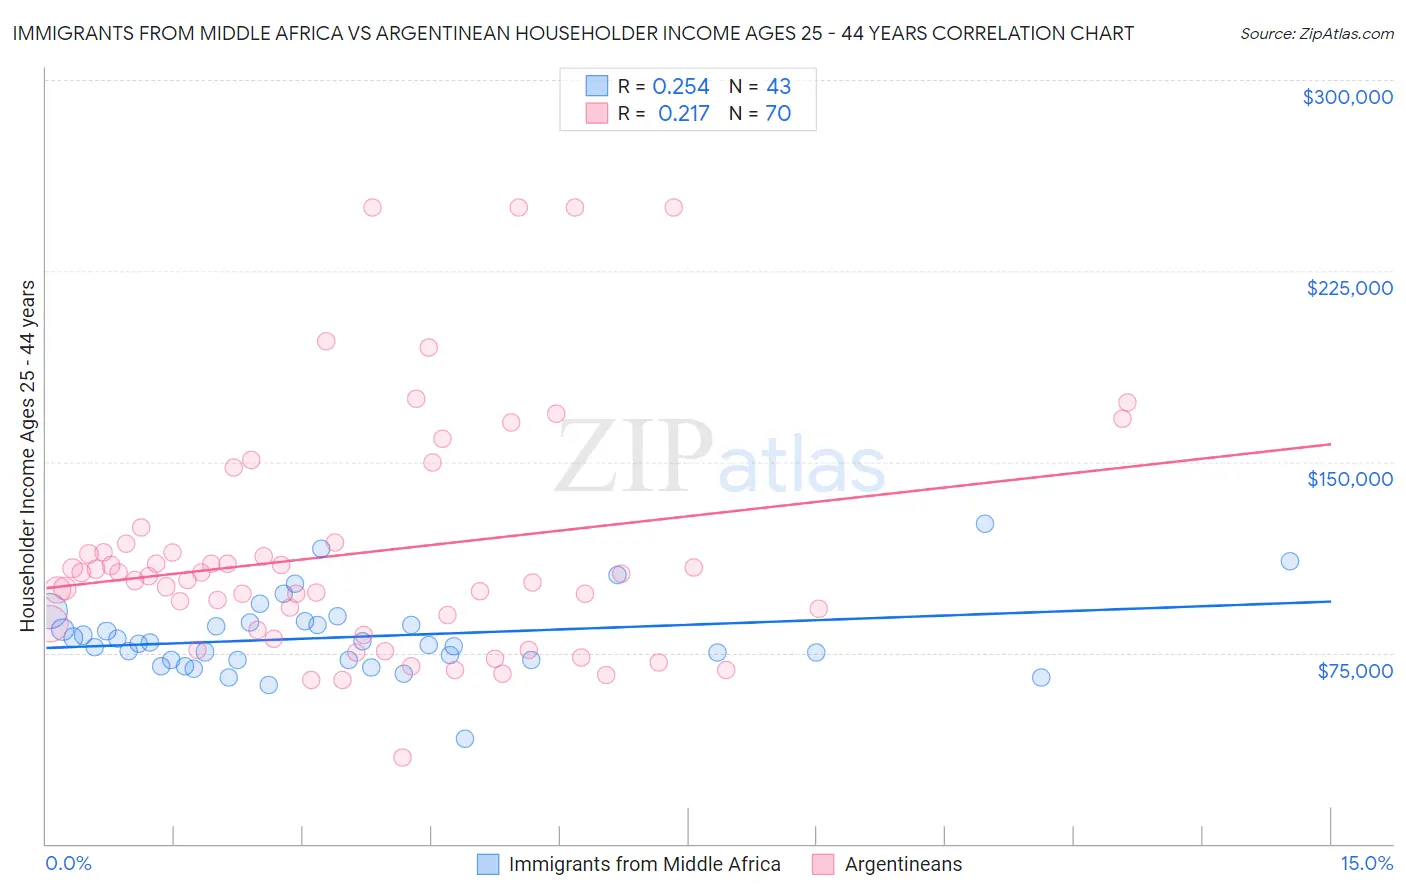 Immigrants from Middle Africa vs Argentinean Householder Income Ages 25 - 44 years